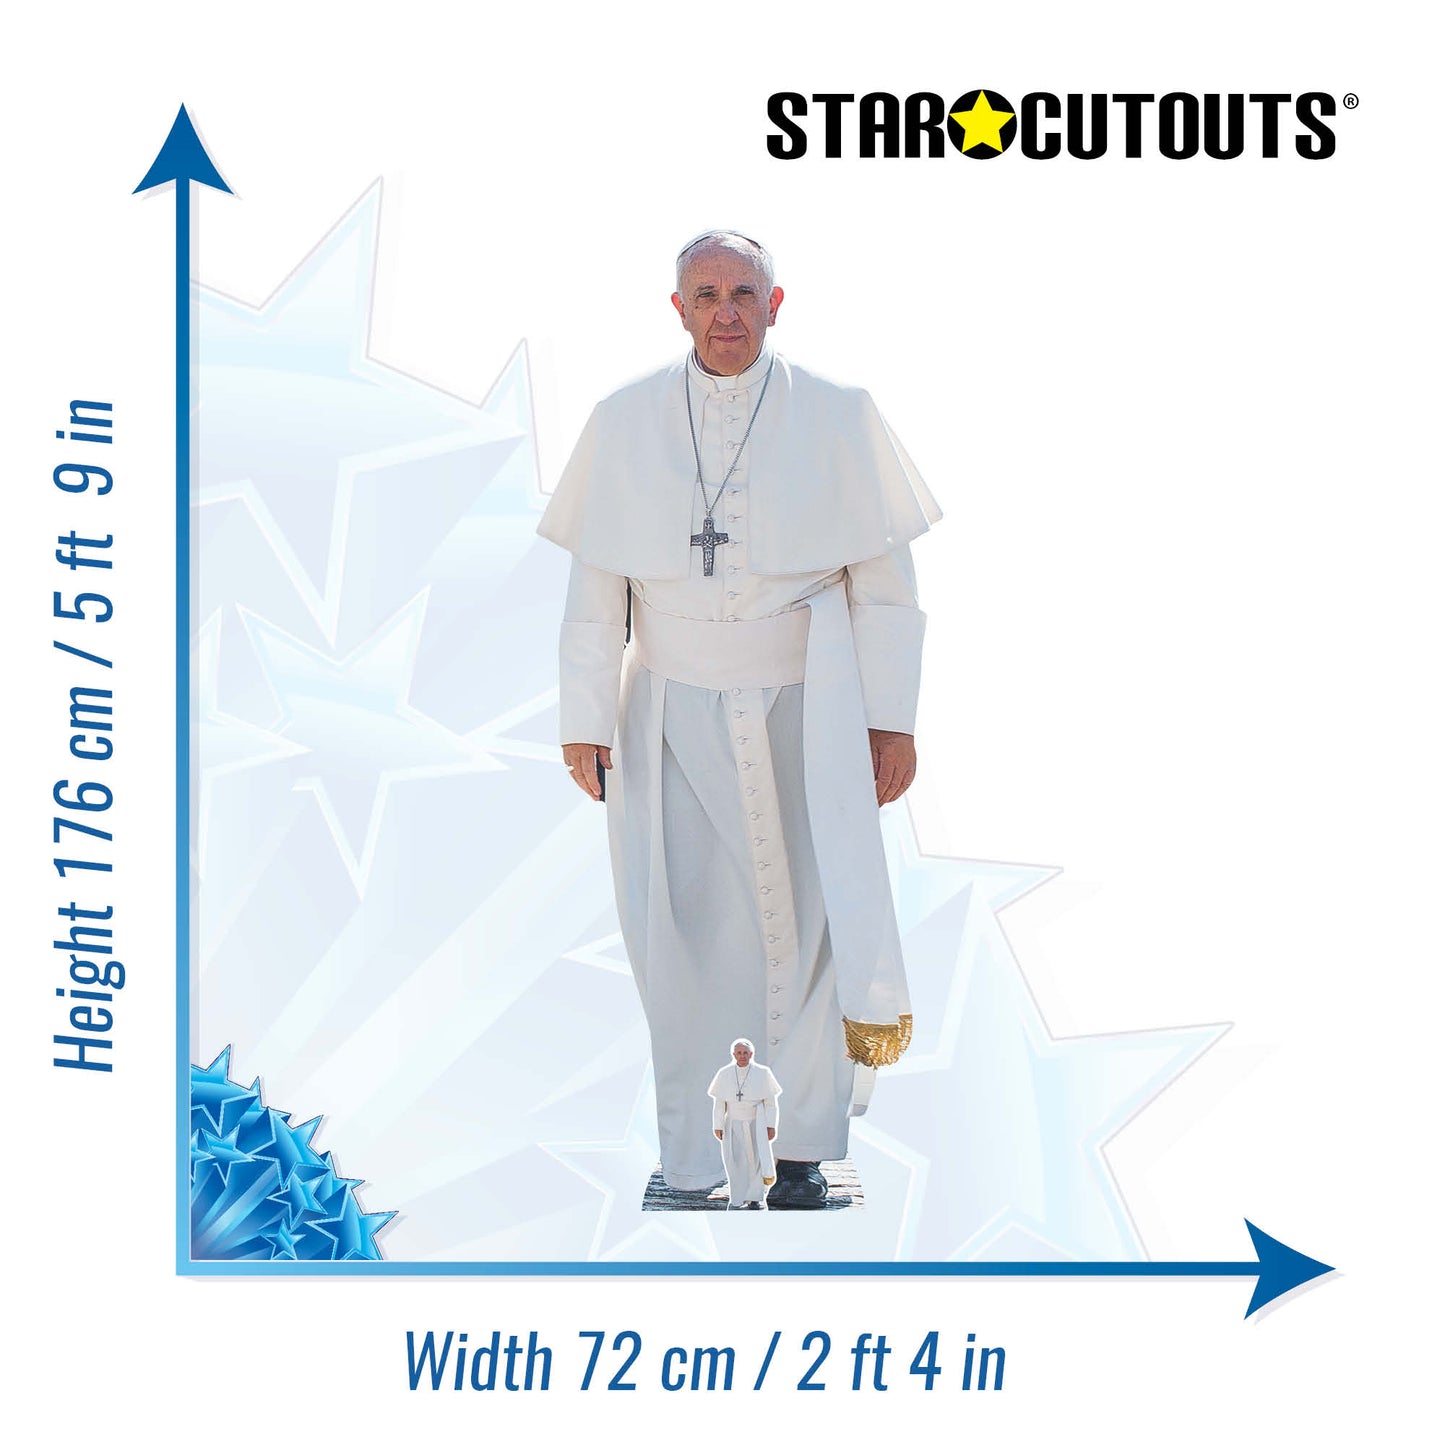 Pope Francis Cardboard Cut Out Height 176cm